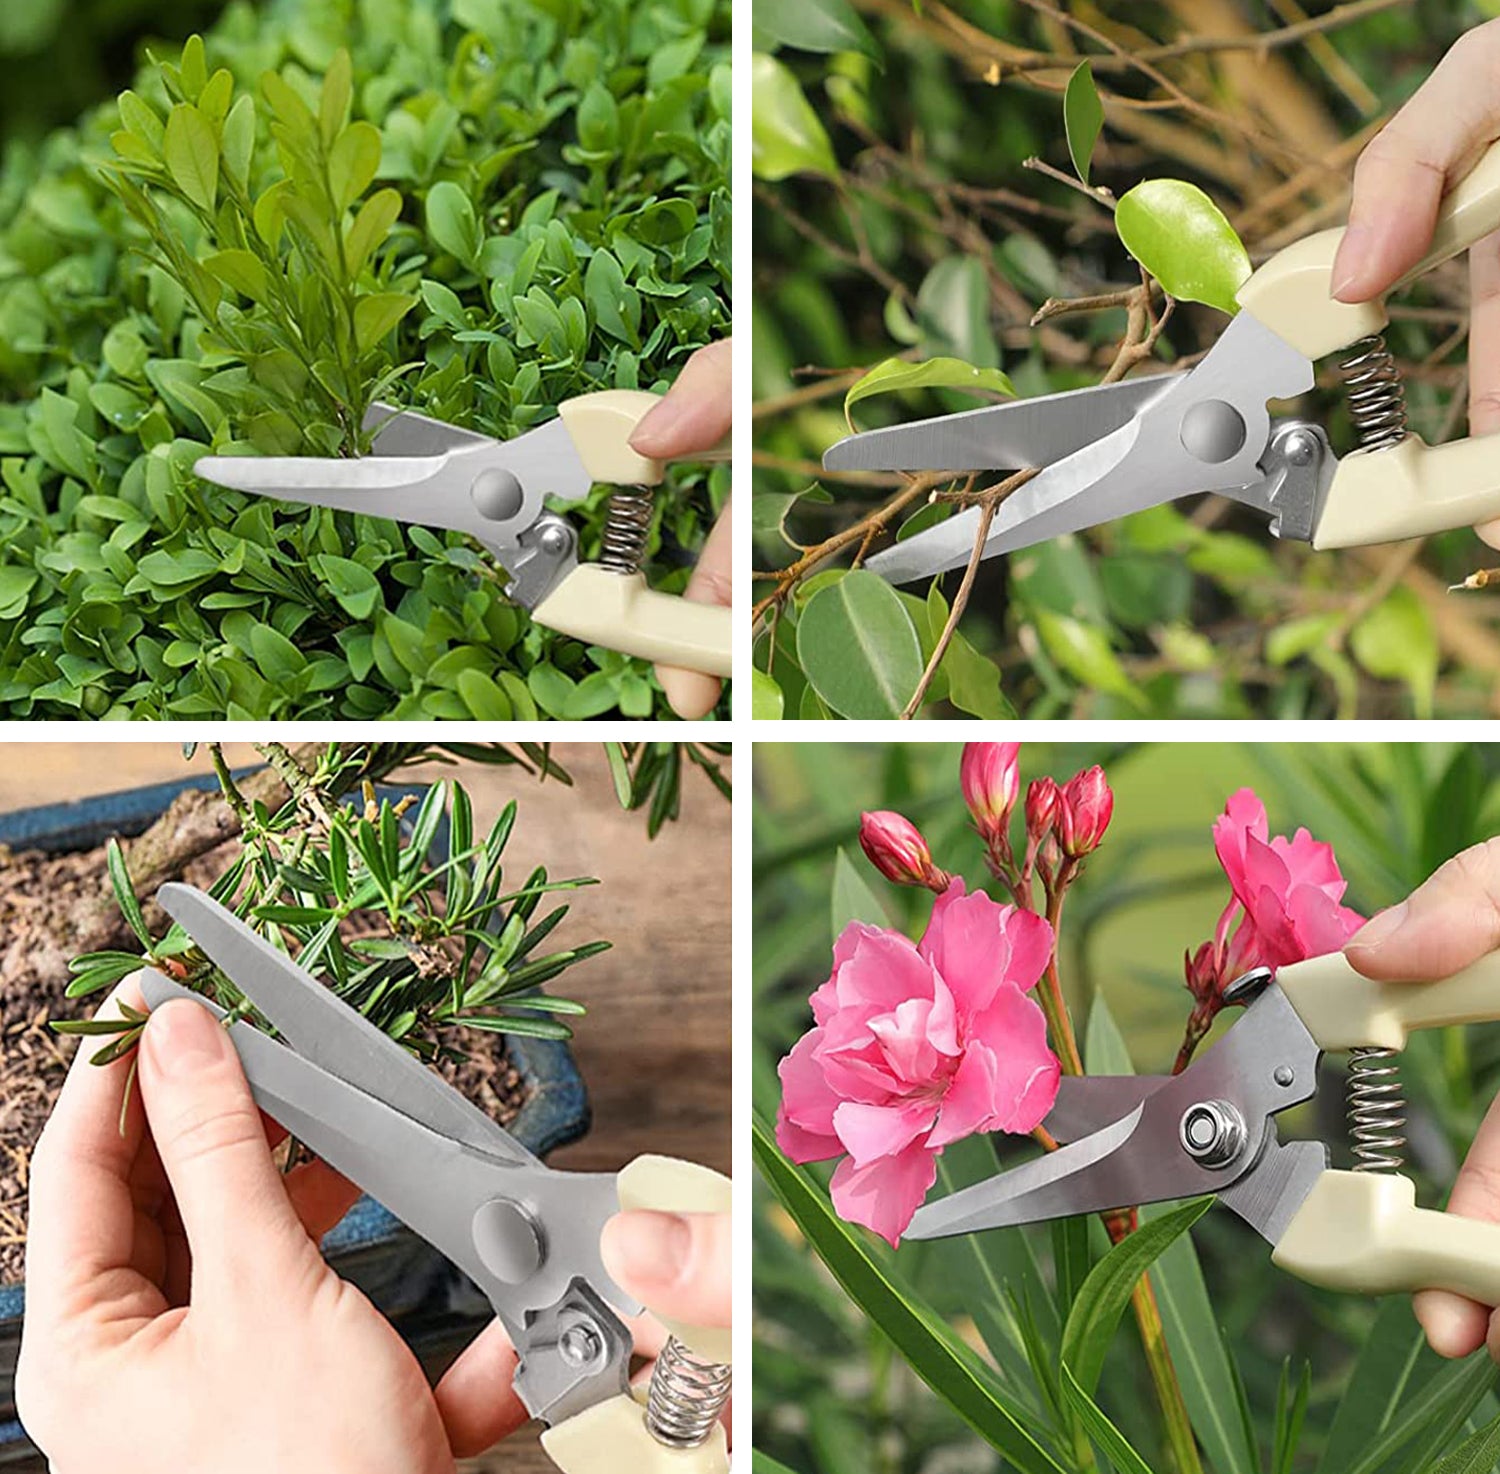 Rush To Sky Premium Pruning Shears, Scissors Gardening Tools, Garden Clippers Trimming Floral, Rose, Flower Stem, Tree and Indoor Live Plant, Hand Pruners, Florist Snips Set, Small Trimmer, 2 Pack